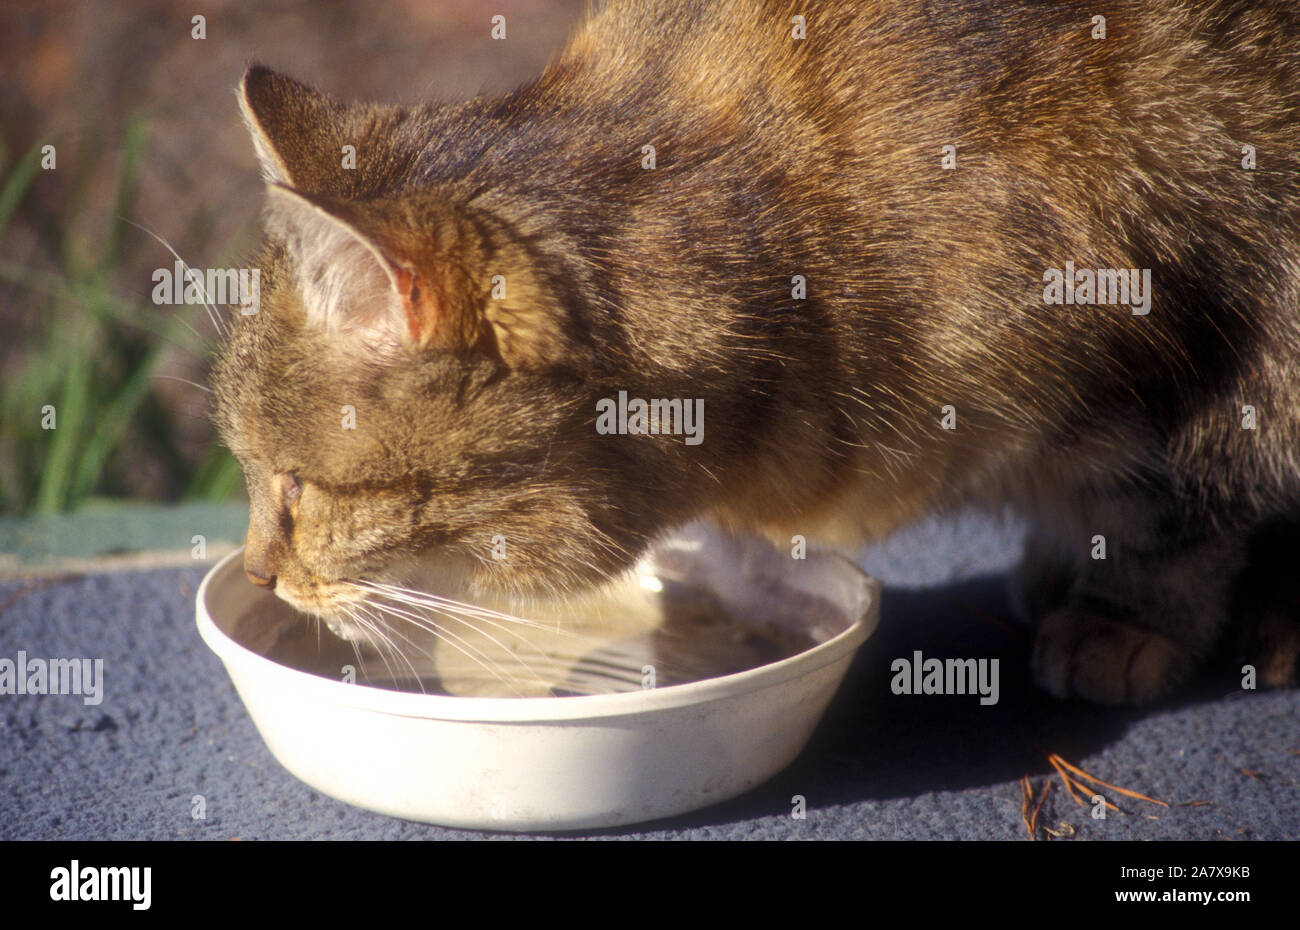 CLOSE-UP OF A TABBY CAT ABOUT TO HAVE A DRINK Stock Photo